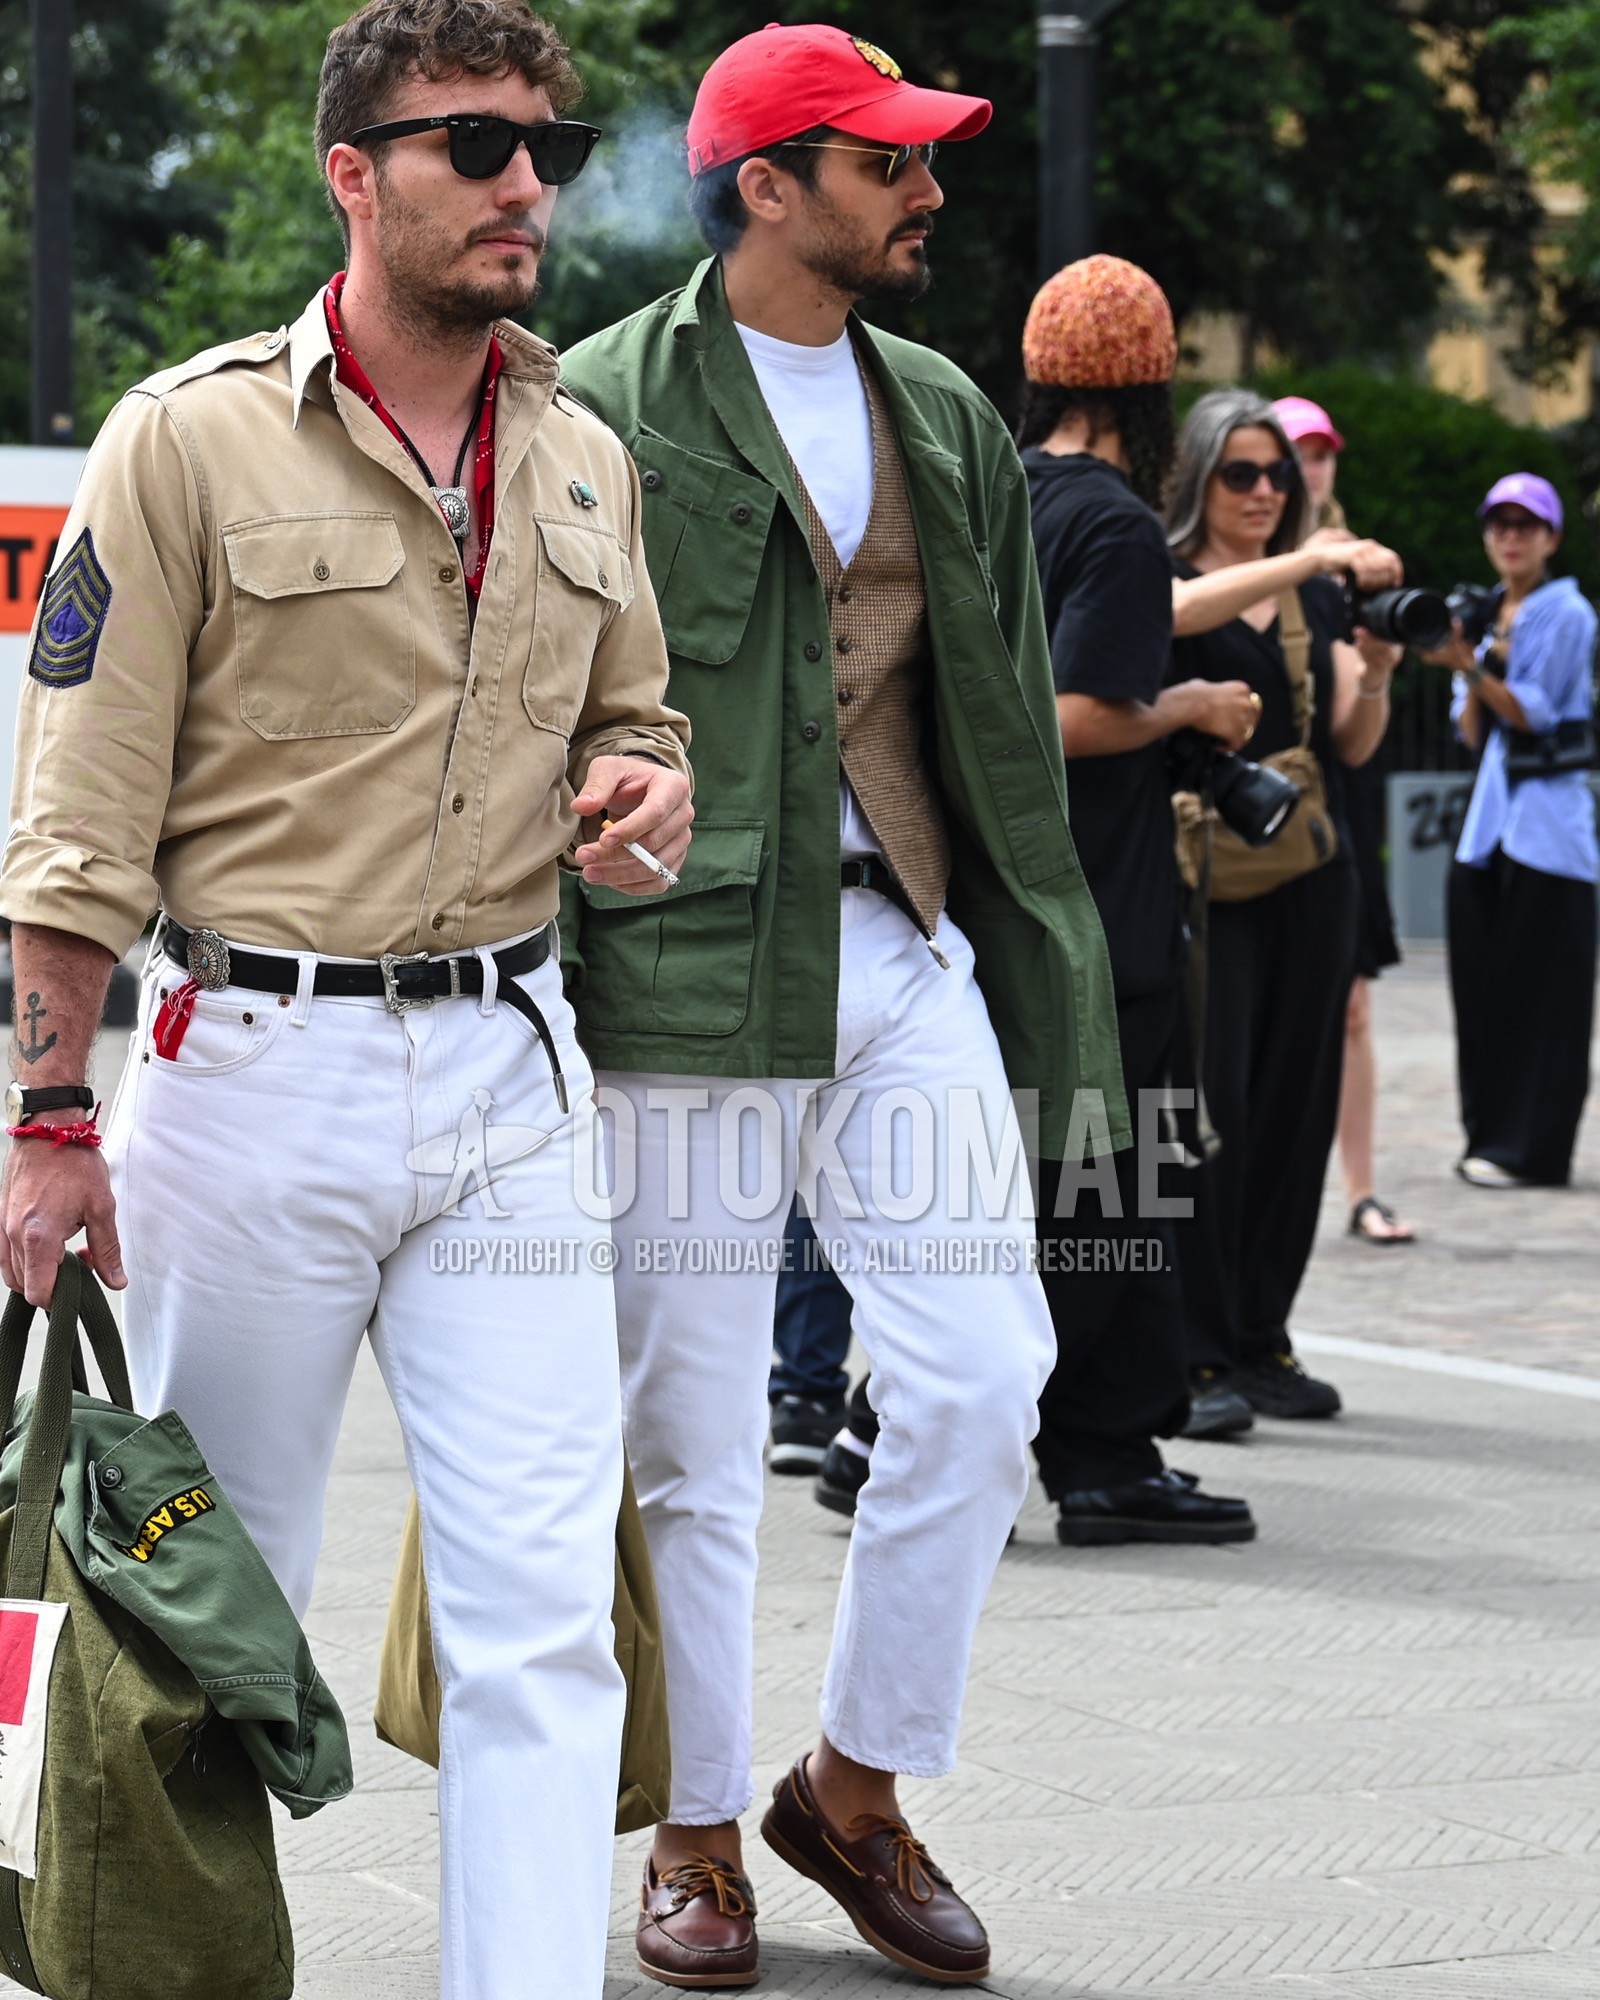 Men's spring summer autumn outfit with red deca logo baseball cap, olive green plain military jacket, brown plain casual vest, white plain t-shirt, brown plain leather belt, white plain denim/jeans, brown moccasins/deck shoes leather shoes.